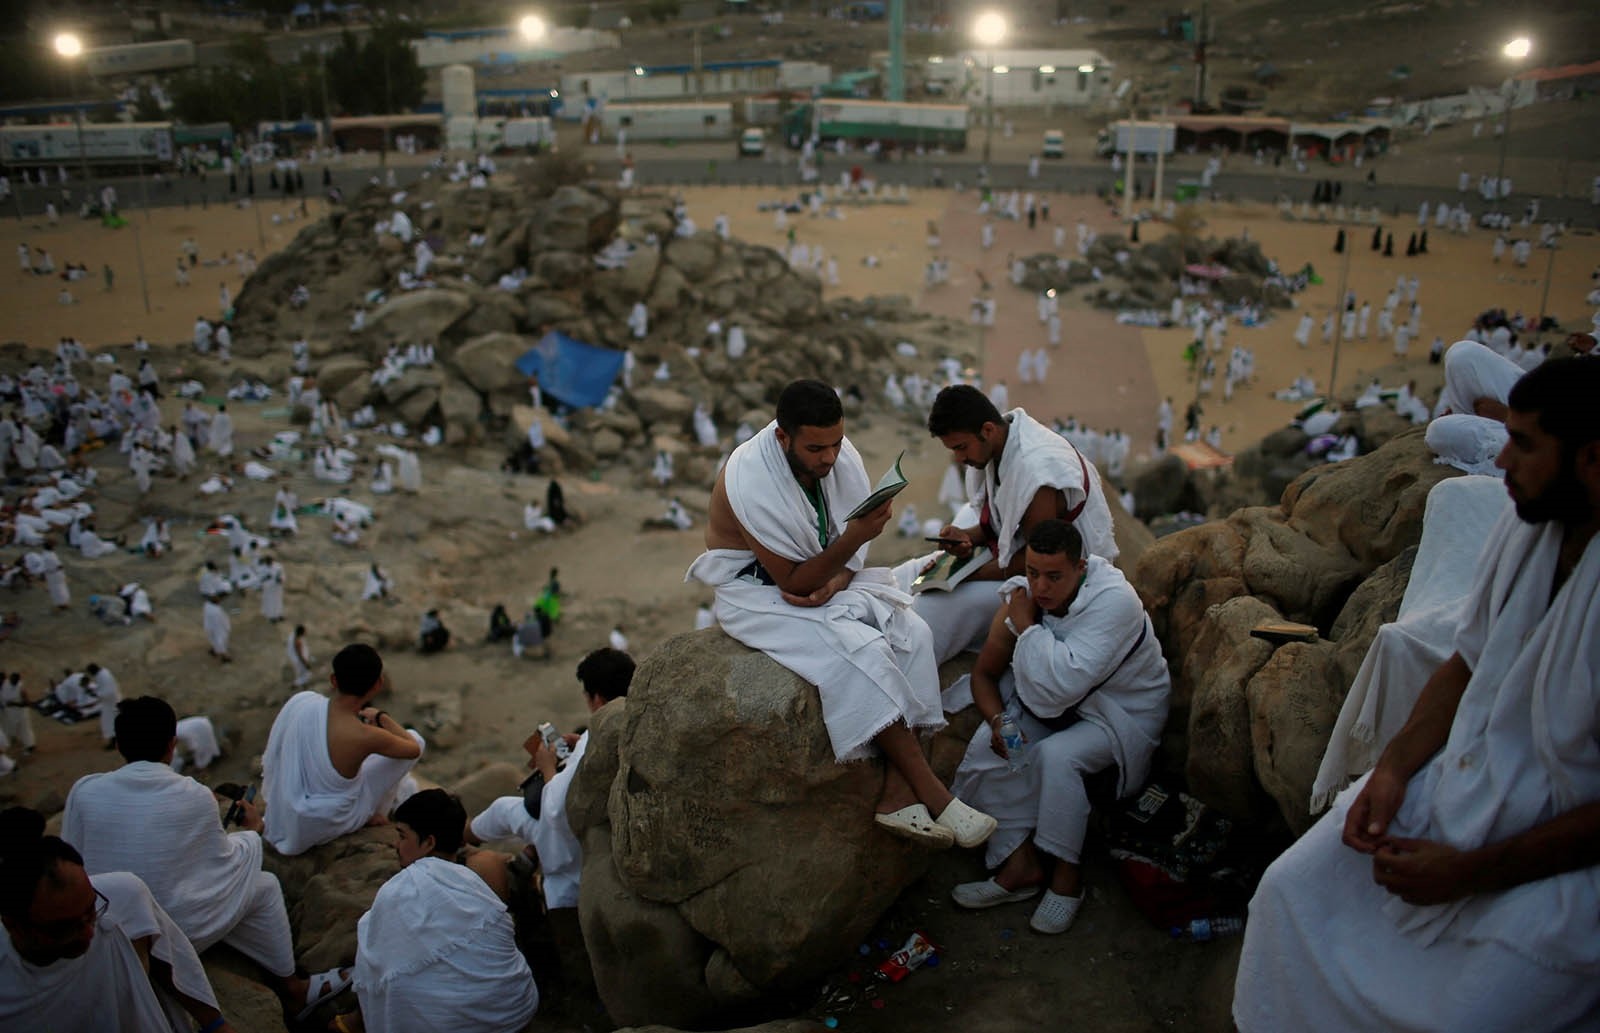 Muslim pilgrims gather on Mount Mercy on the plains of Arafat during the annual haj pilgrimage, outside the holy city of Mecca, Saudi Arabia August 31, 2017 (Reuters Photo)